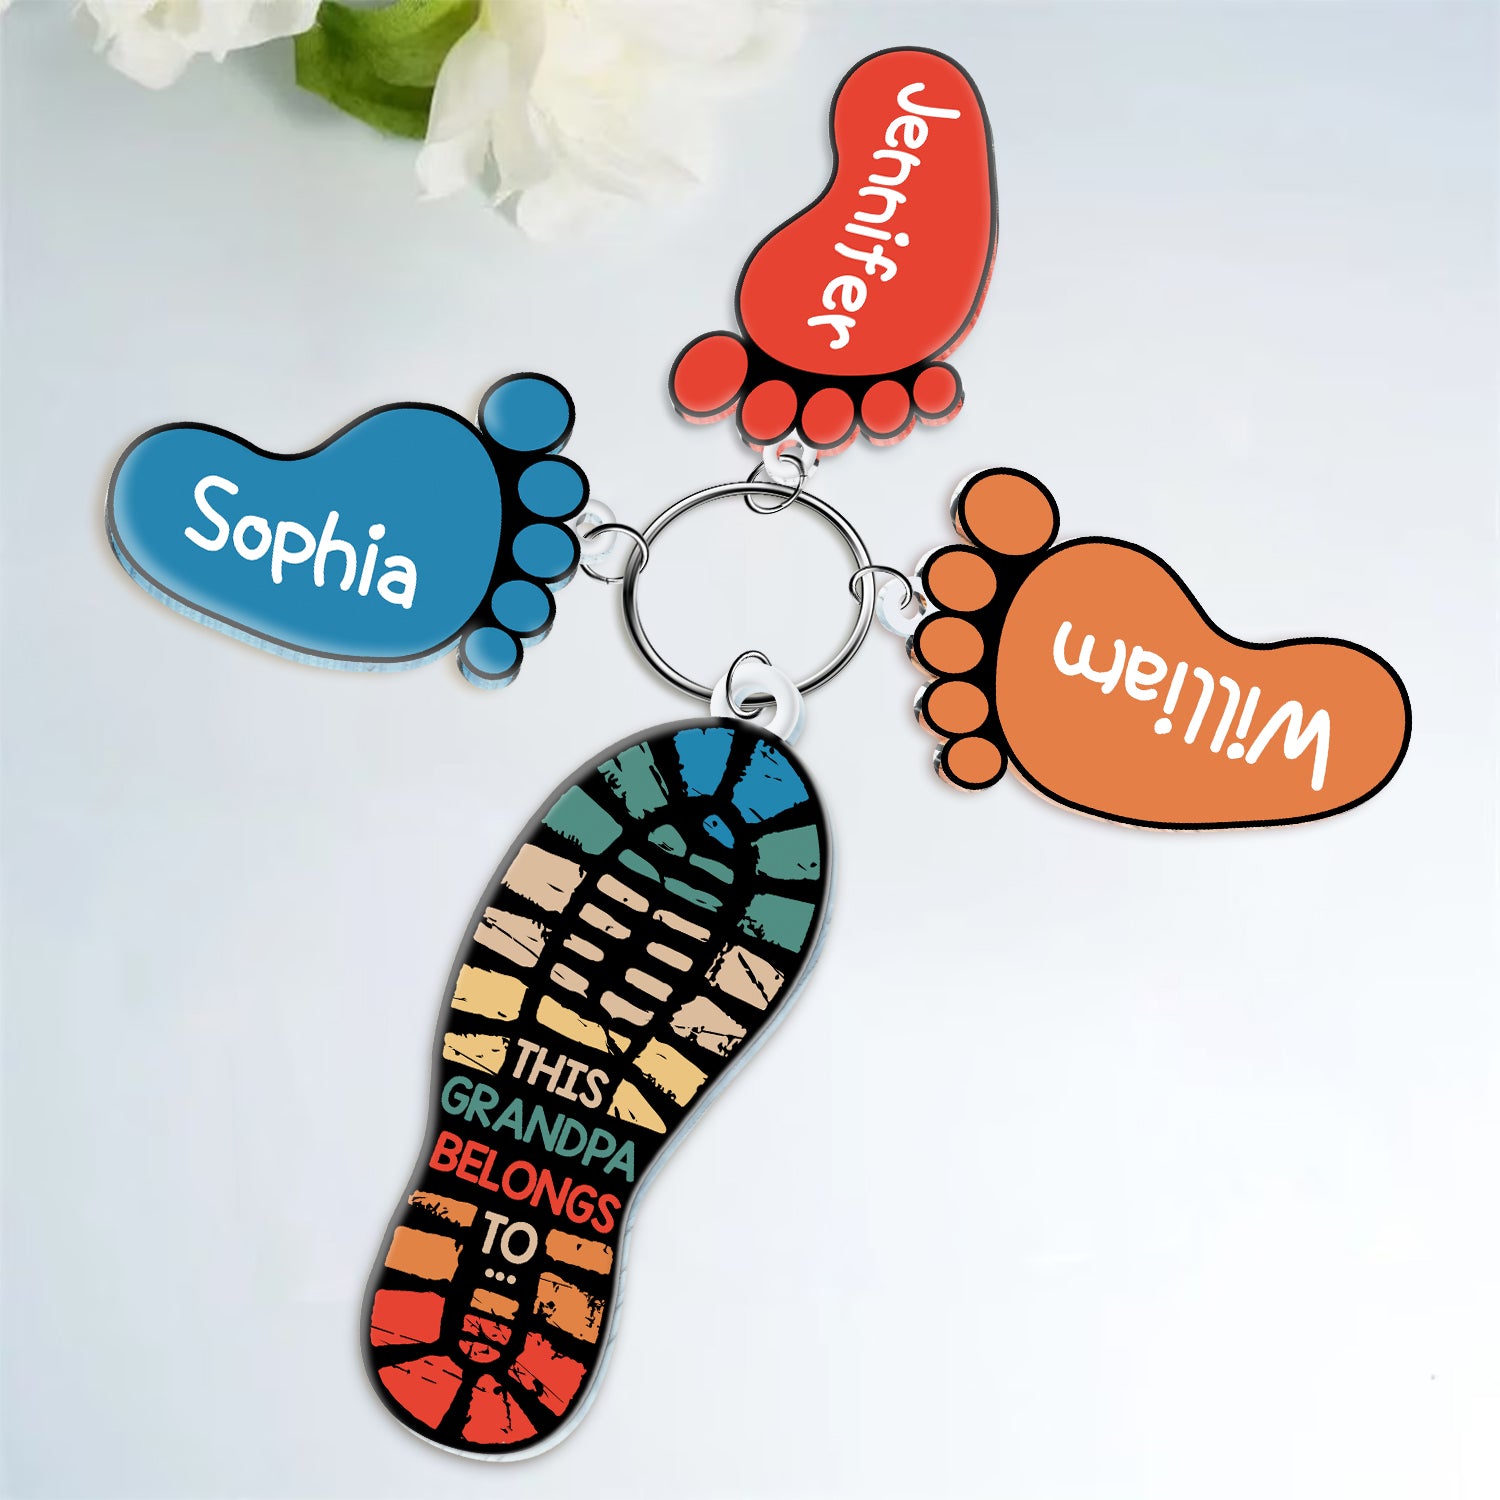 This Grandpa Belongs To - Personalized Acrylic Tag Keychain